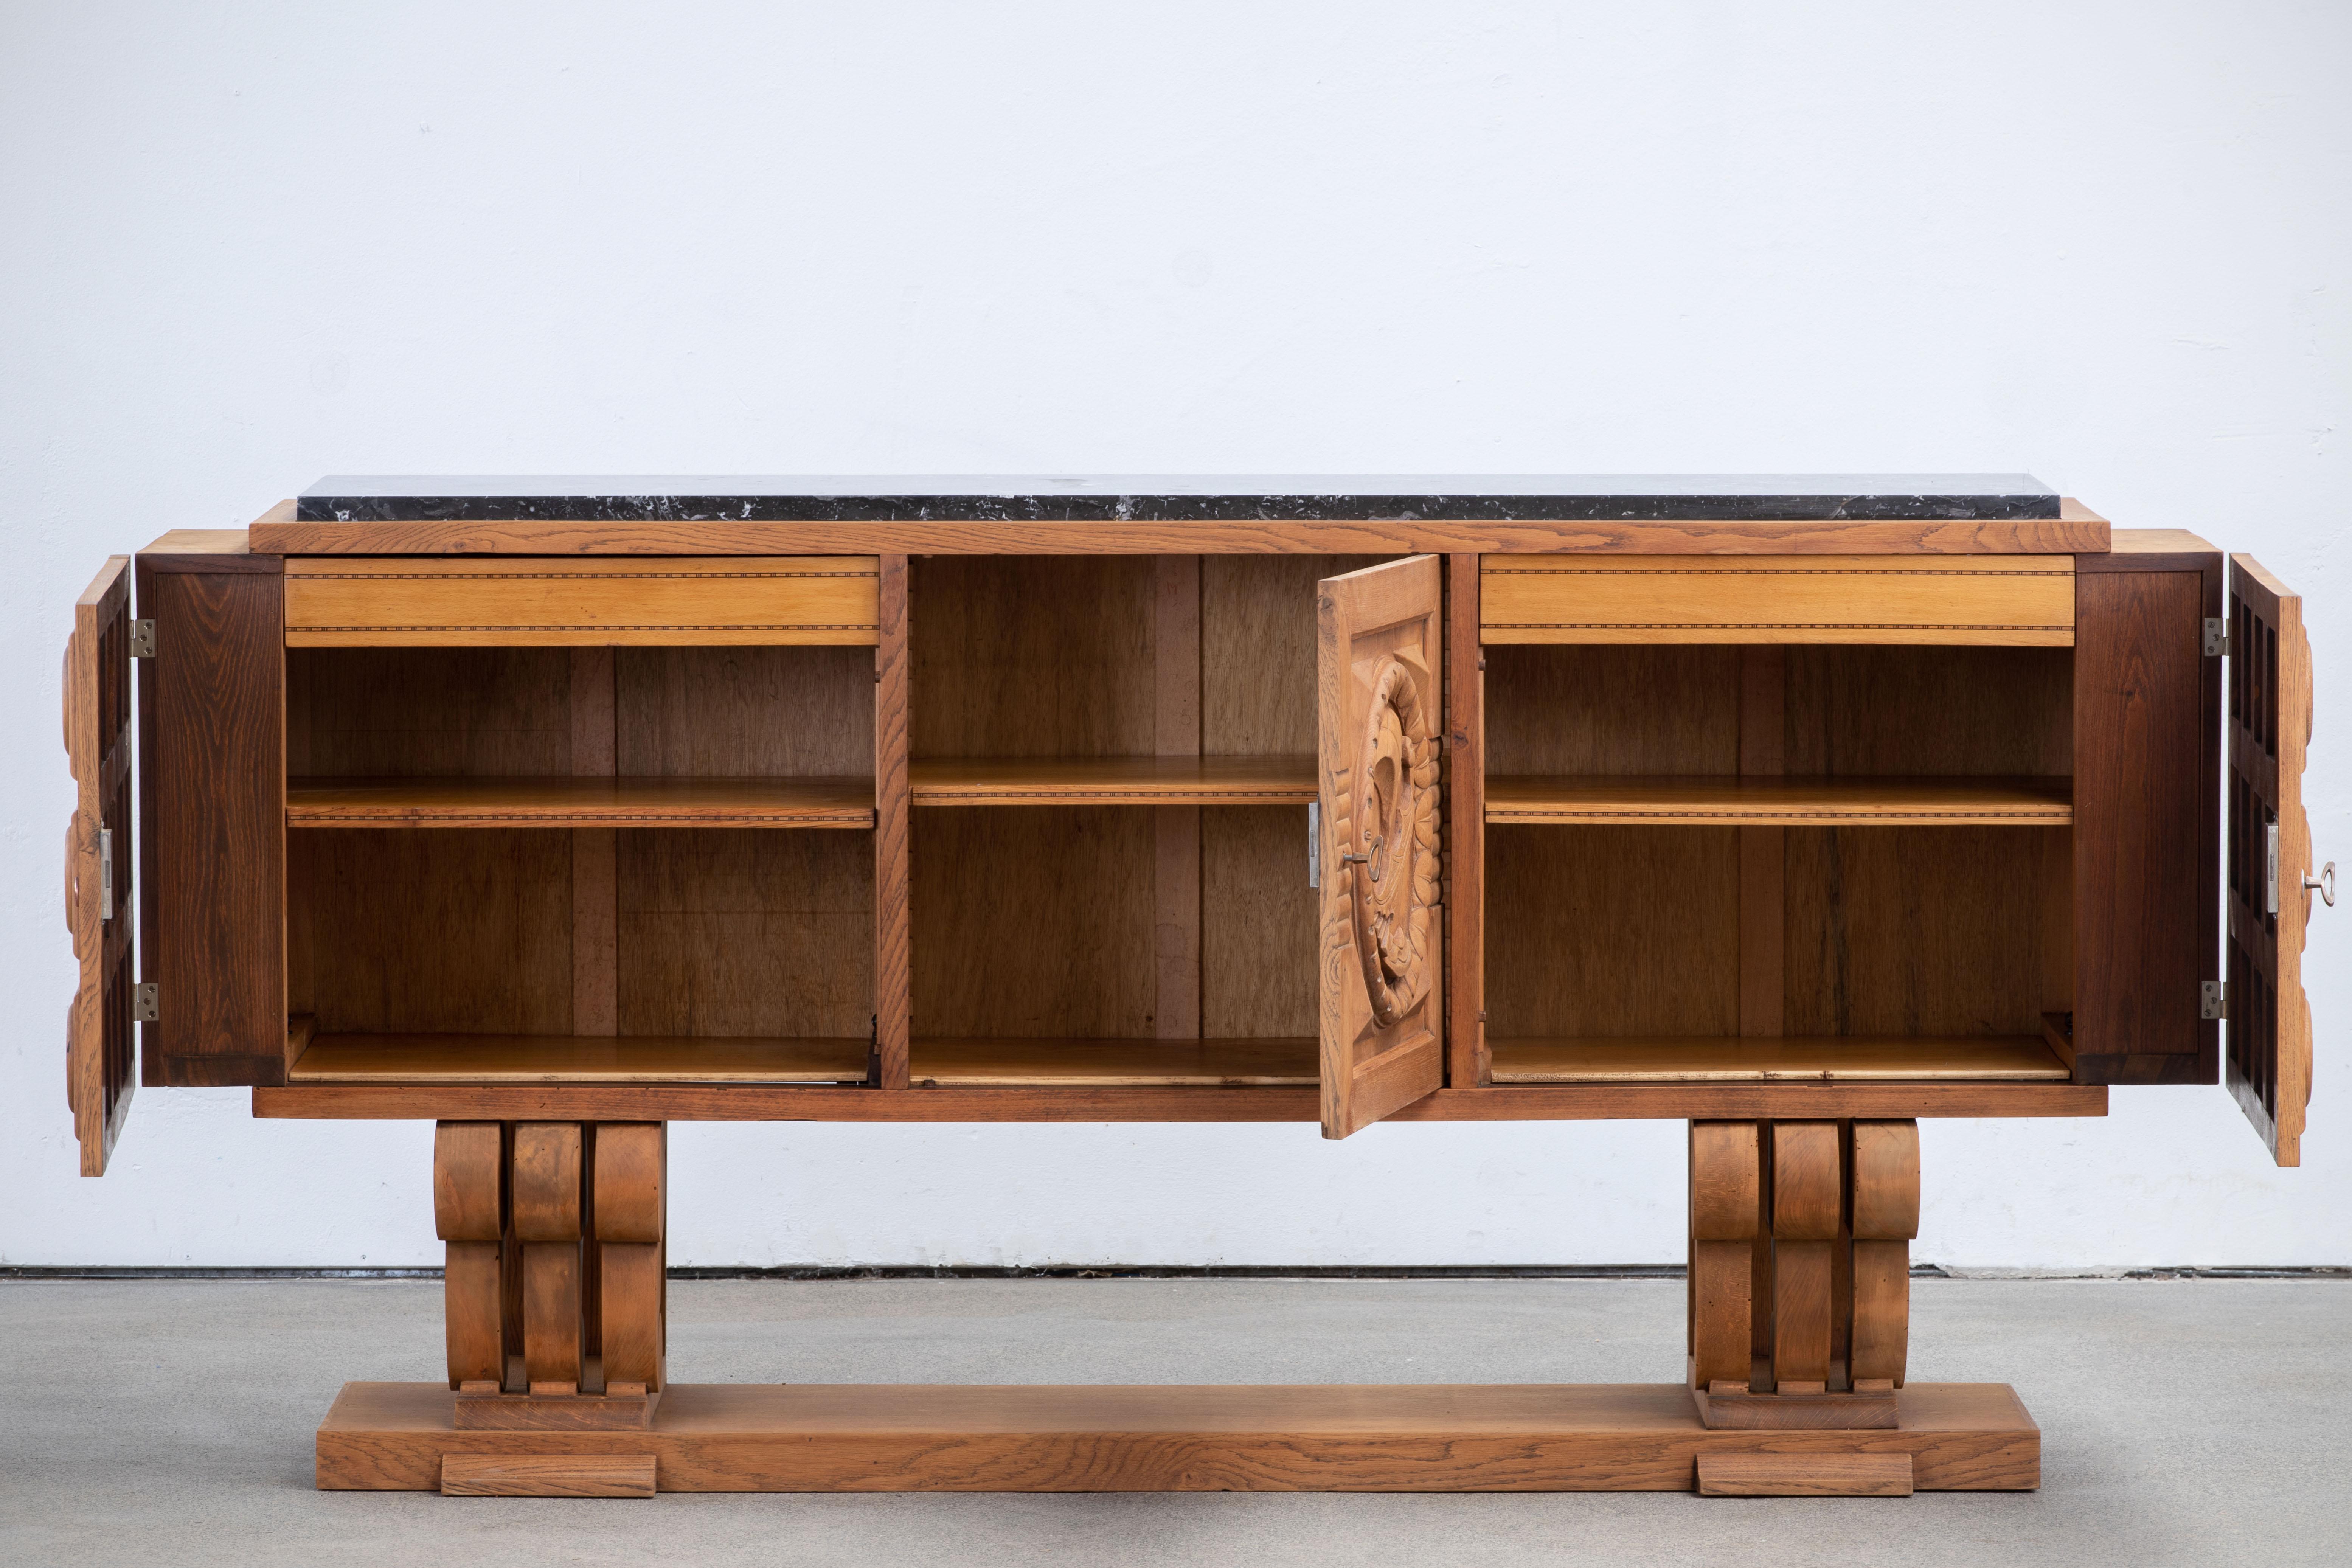 Credenza, solid oak, France, 1940s.
Large Art Deco Brutalist sideboard. This heavy Brutalist credenza seems to float on its elegant base. The credenza consists of two large storage facilities and covered with very detailed diamond designed door